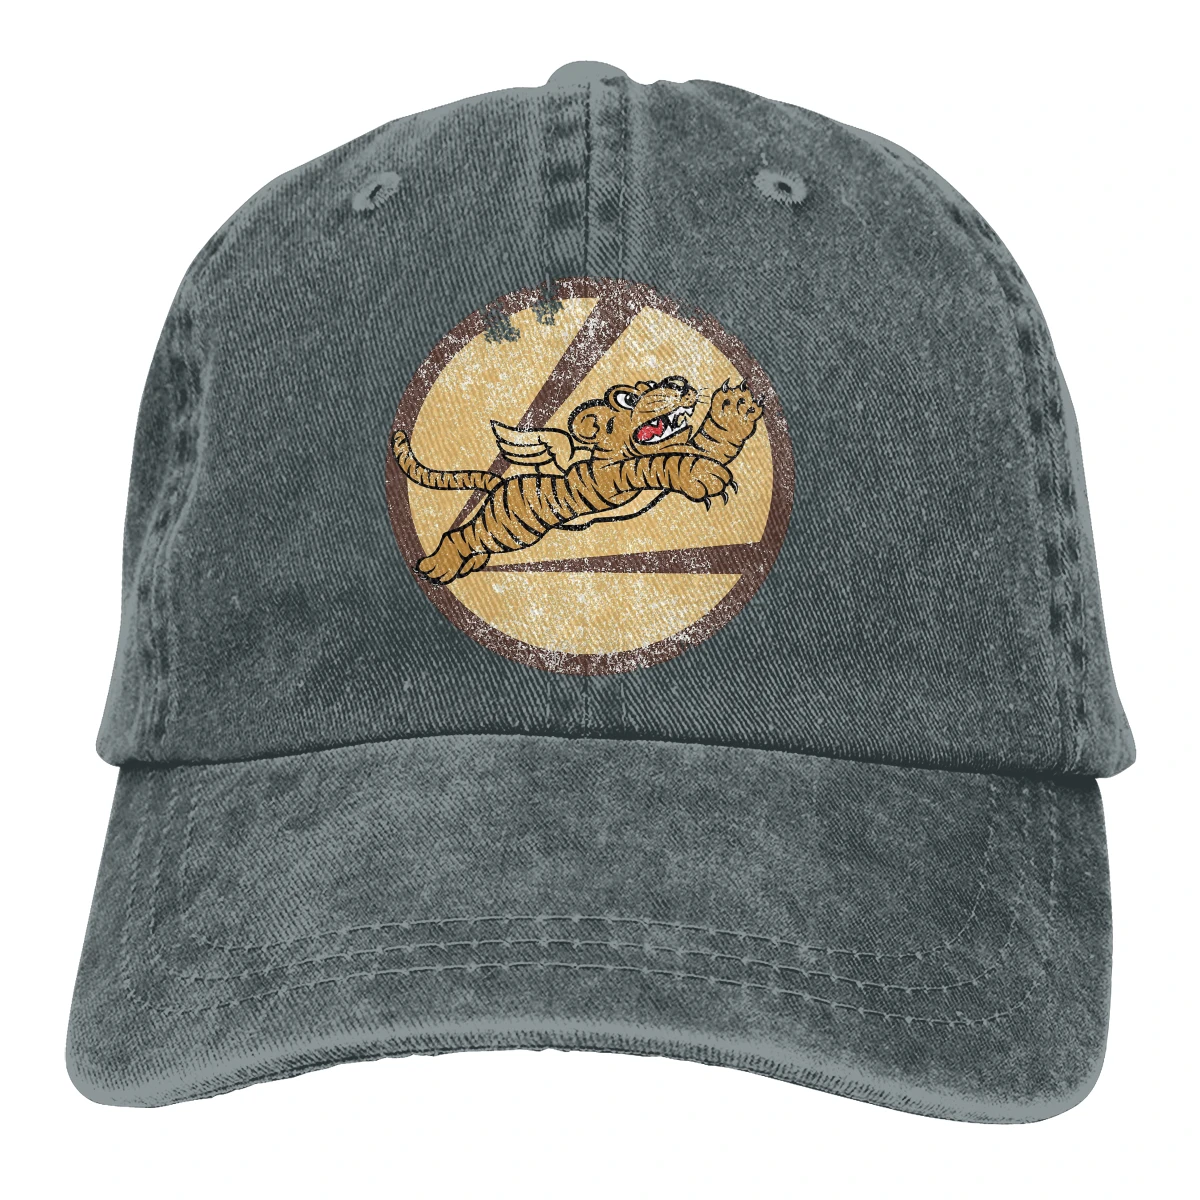 AVG Flying Tigers Squadron Patch Baseball Cap Men ww2 WWII World War 2 Caps - $15.90